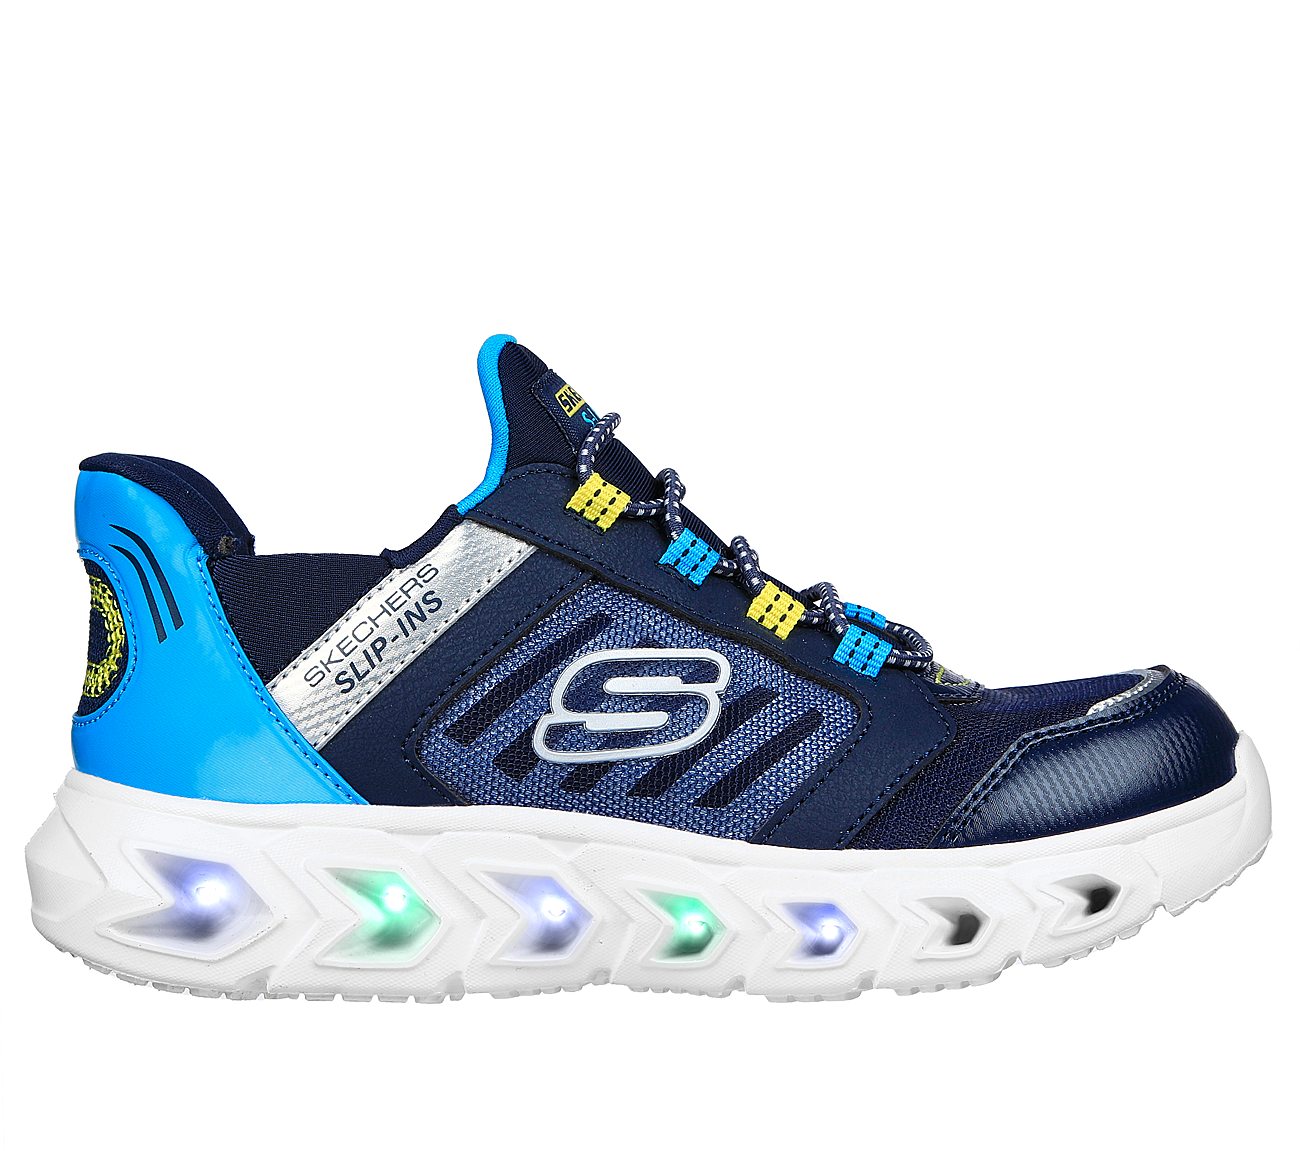 HYPNO-FLASH 2.0 - ODELUX, NAVY/BLUE Footwear Right View